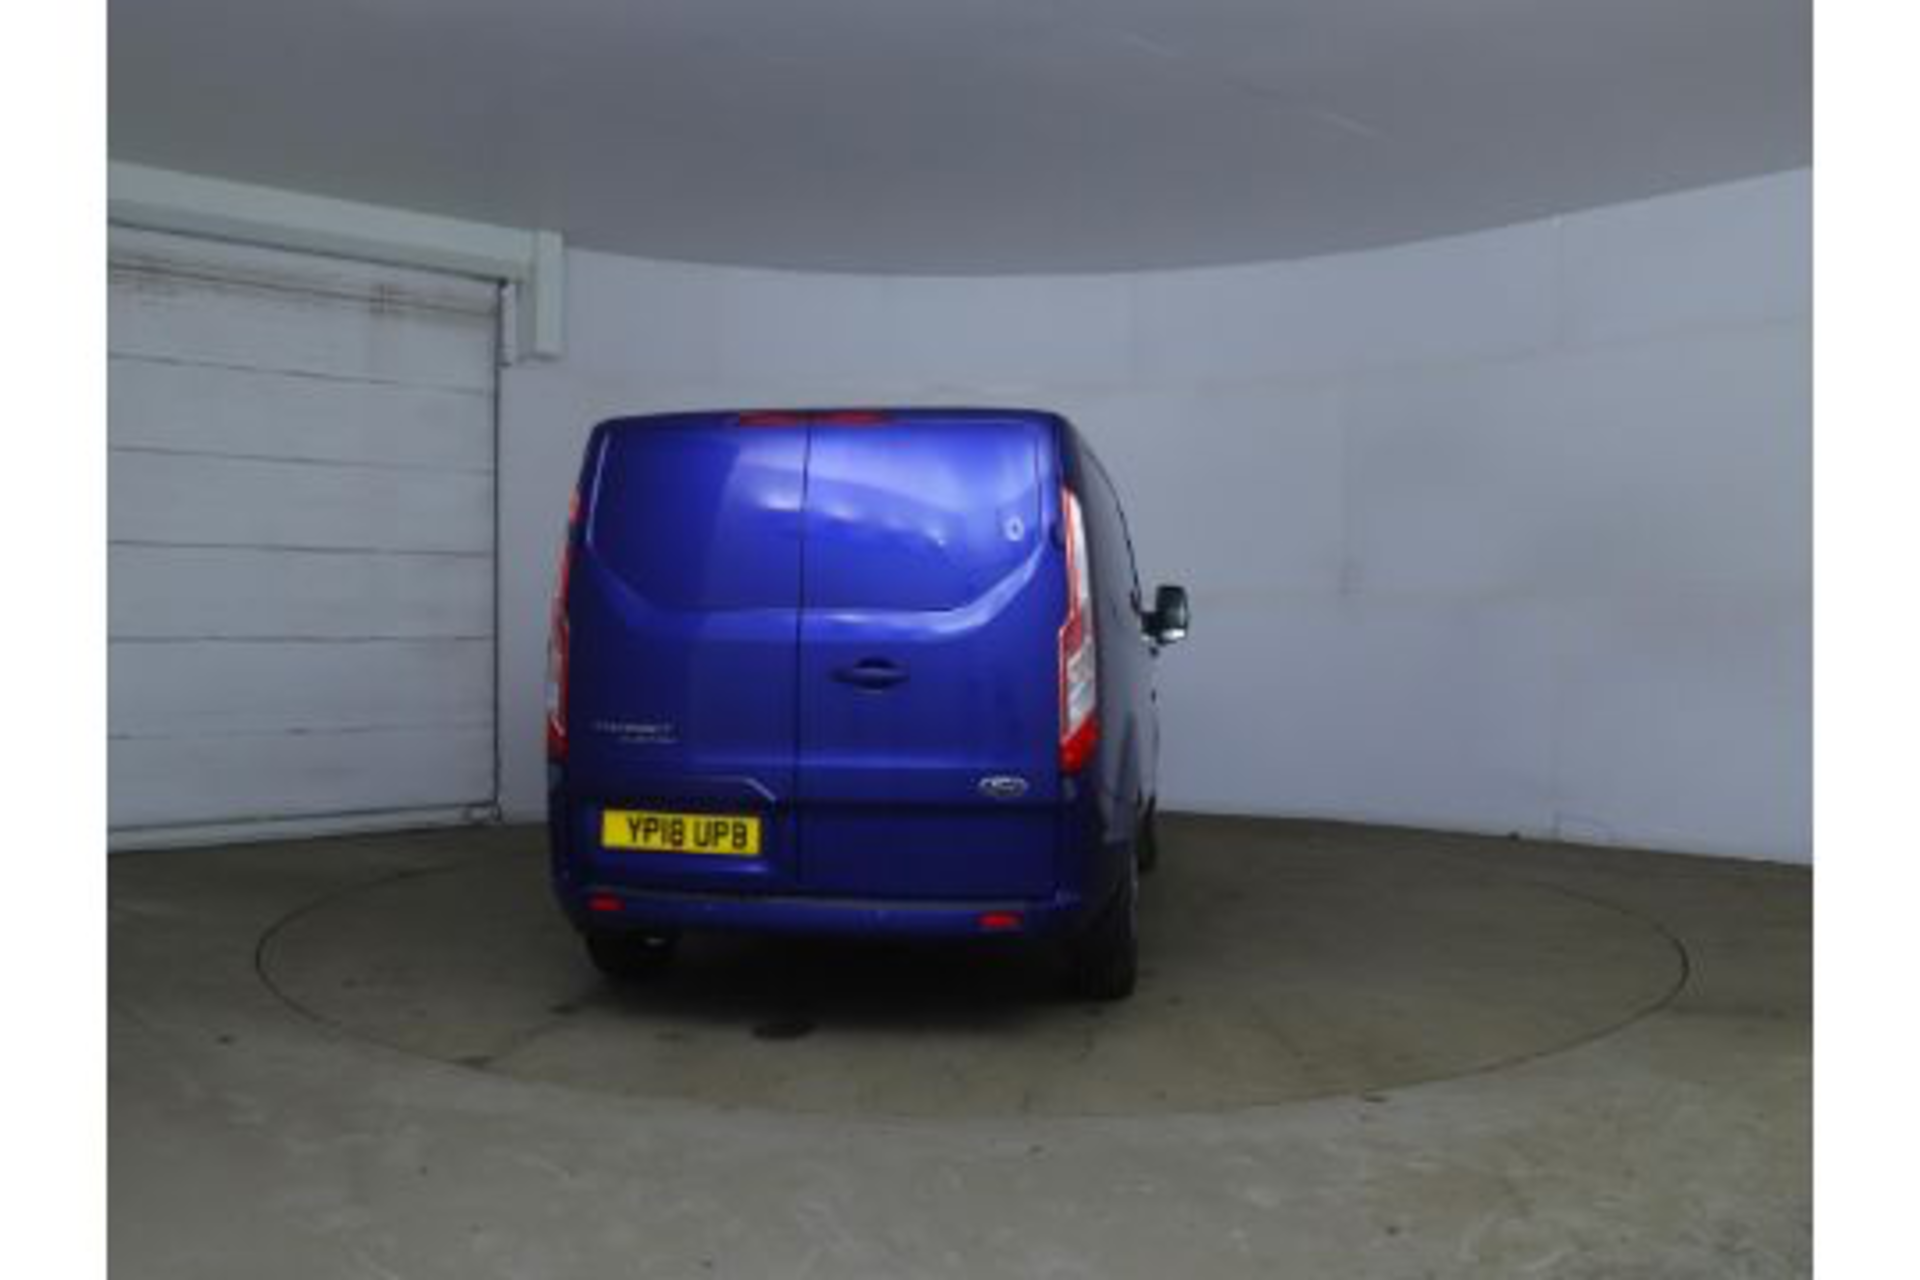 Reserve Met - Ford Transit Custom "Limited" 2.0Tdci (130) Swb - 18 Reg Air Con Alloys - Euro 6 - Image 5 of 11